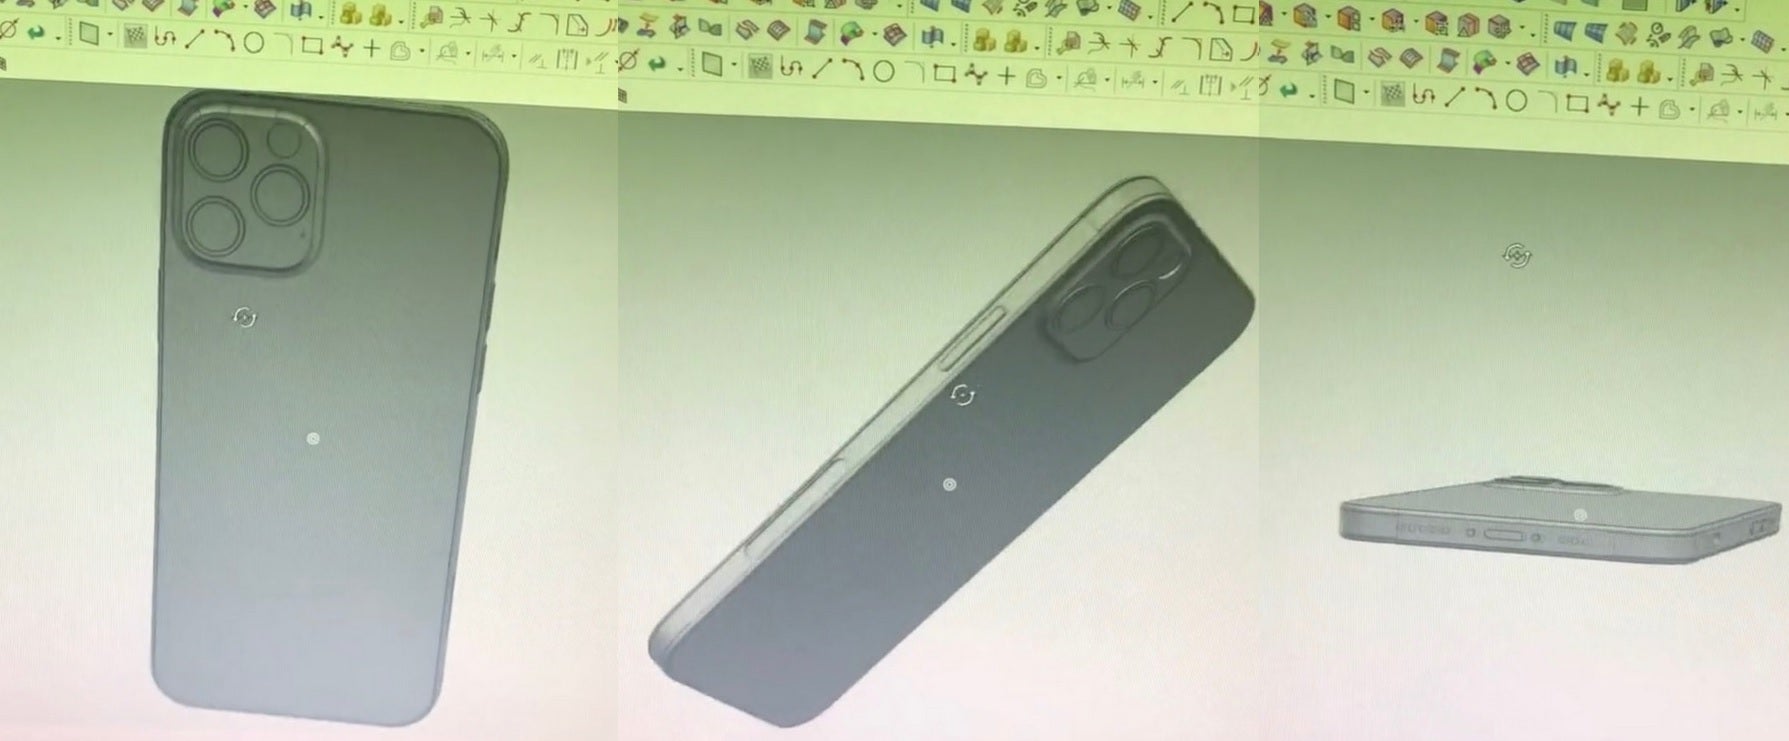 CAD images of the iPhone 12 Pro - Take a look at these molds showing off the classic design of the 5G Apple iPhone 12 line